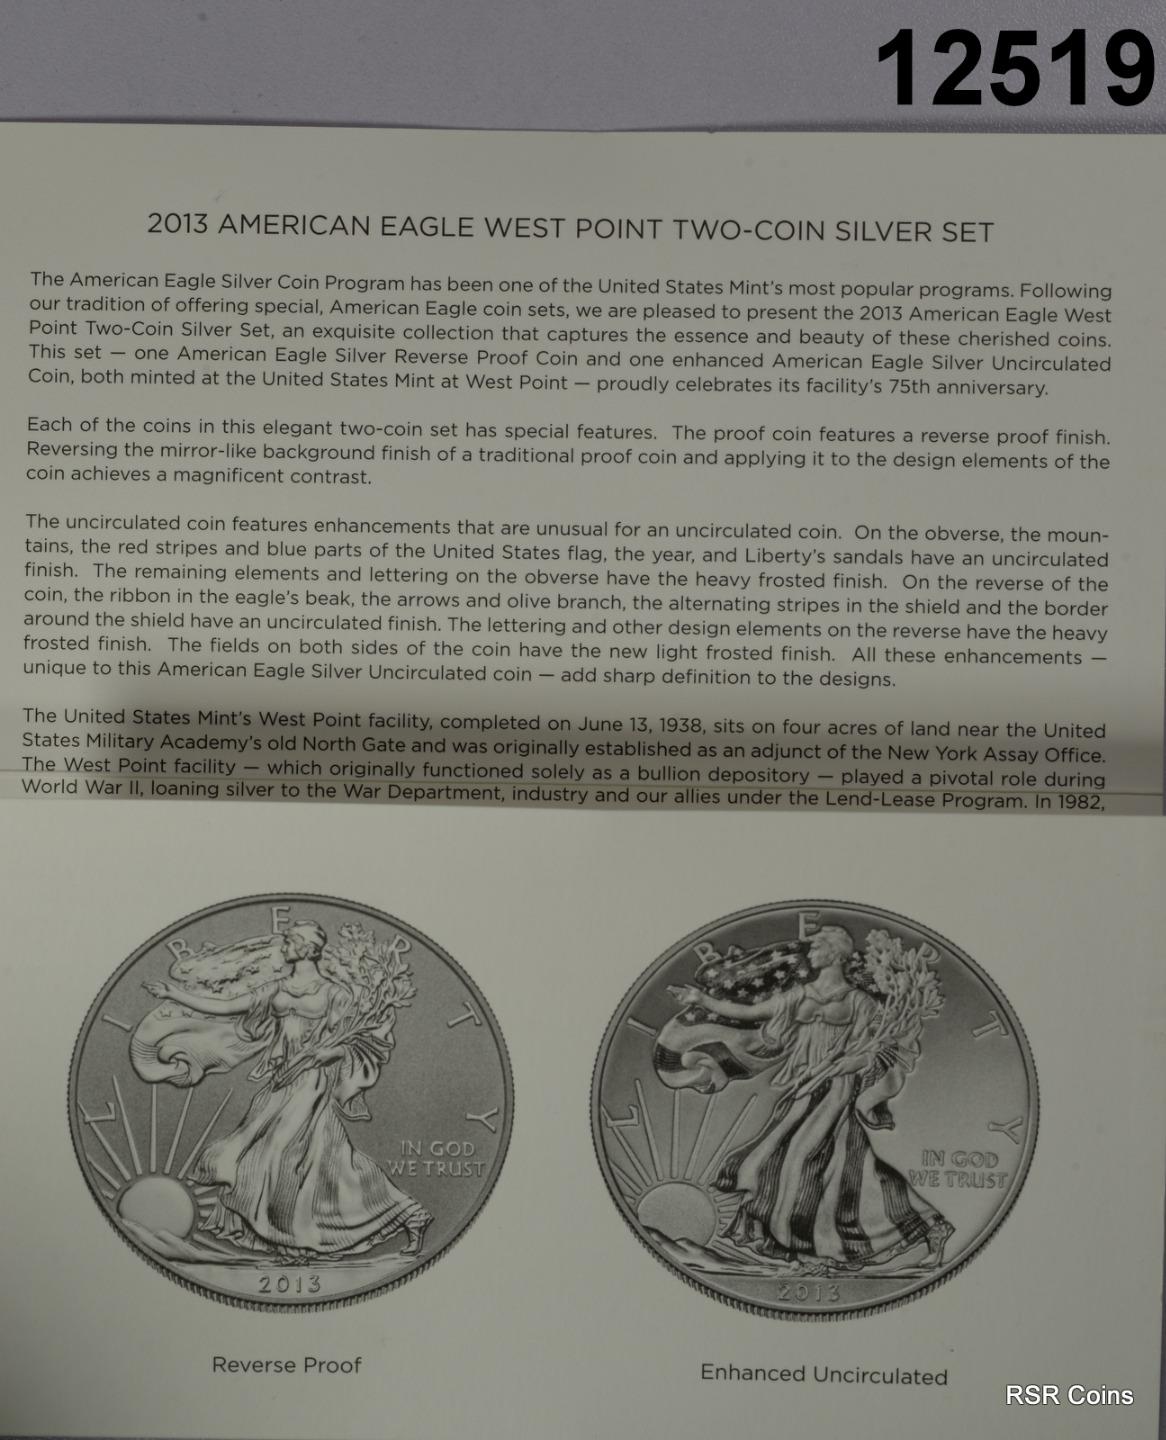 2013 W WEST POINT 2 COIN SILVER EAGLE PROOF SET ANACS CERTIFIED RP70 EU70 #12519